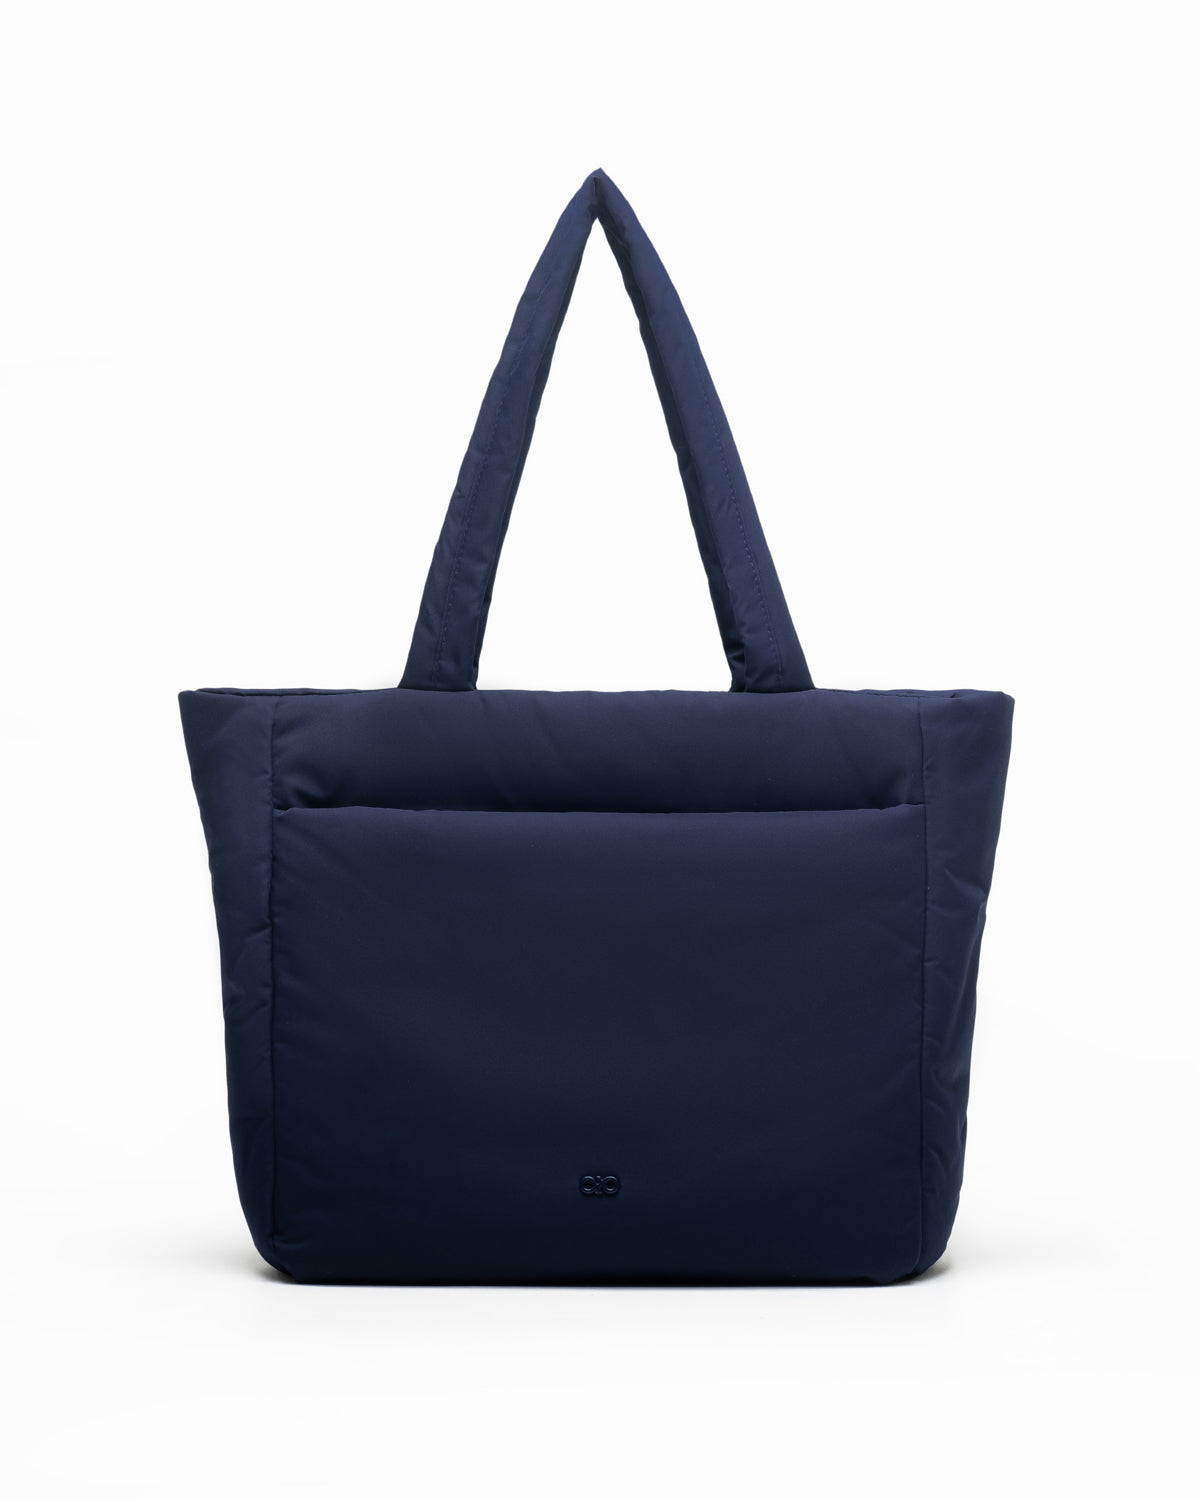 COSY LUXE TOTE BAG IN MIDNIGHT